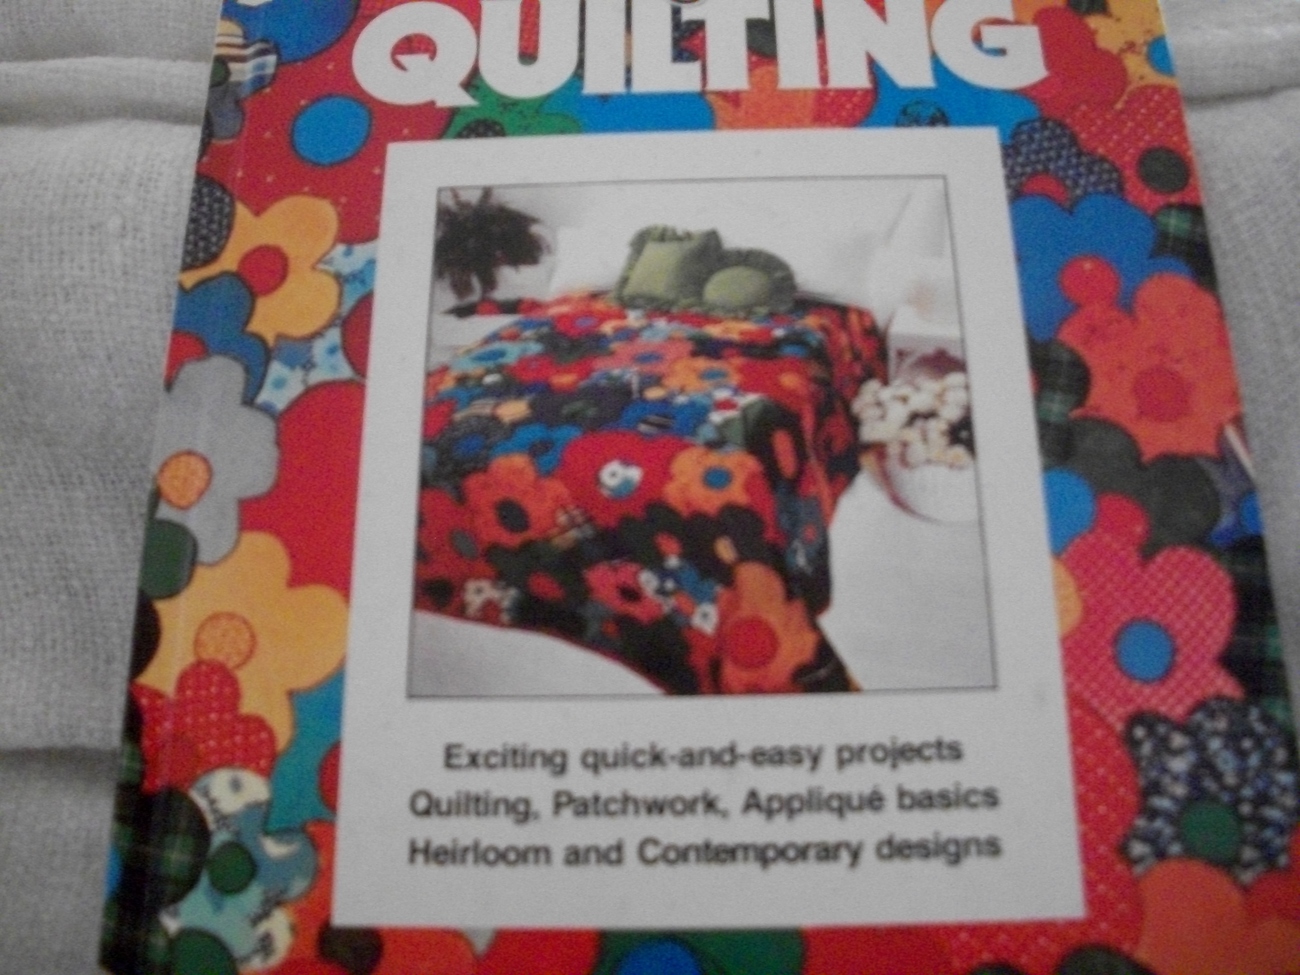 Better Homes and Gardens Patchwork & Quilting - $7.00